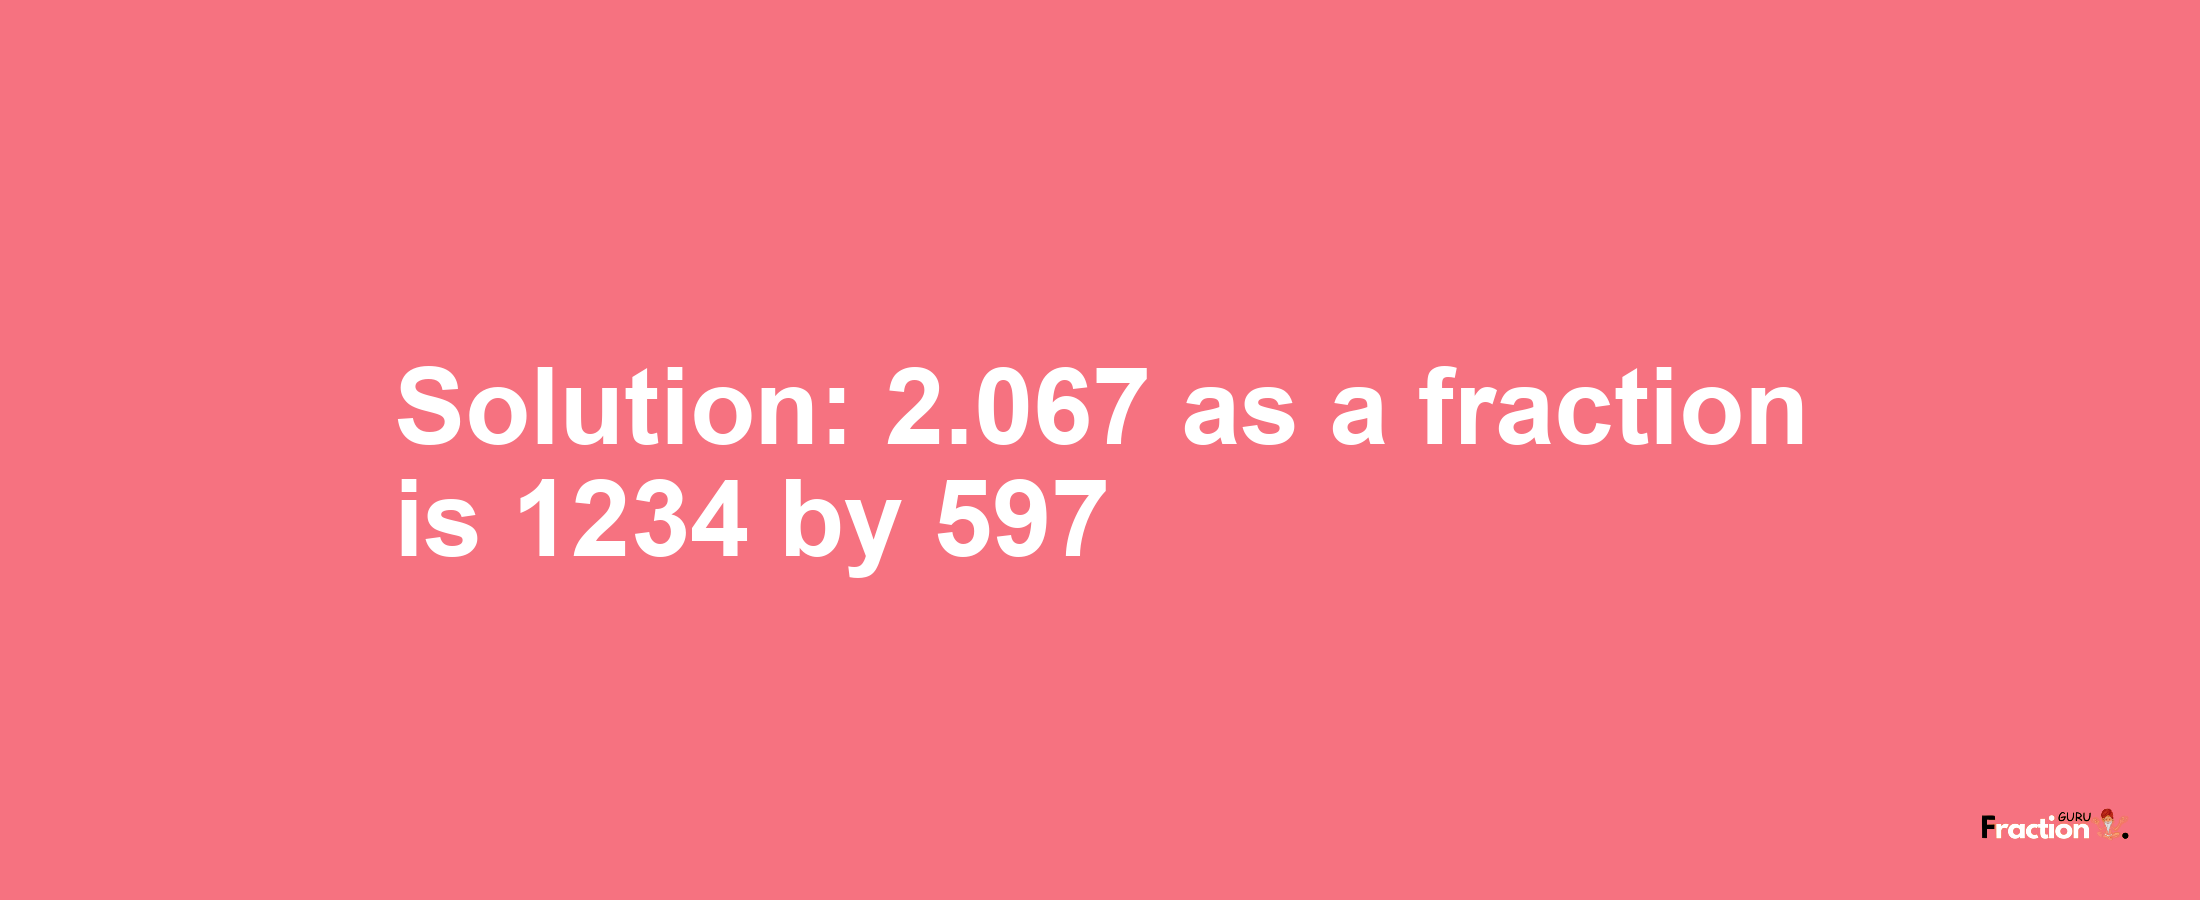 Solution:2.067 as a fraction is 1234/597